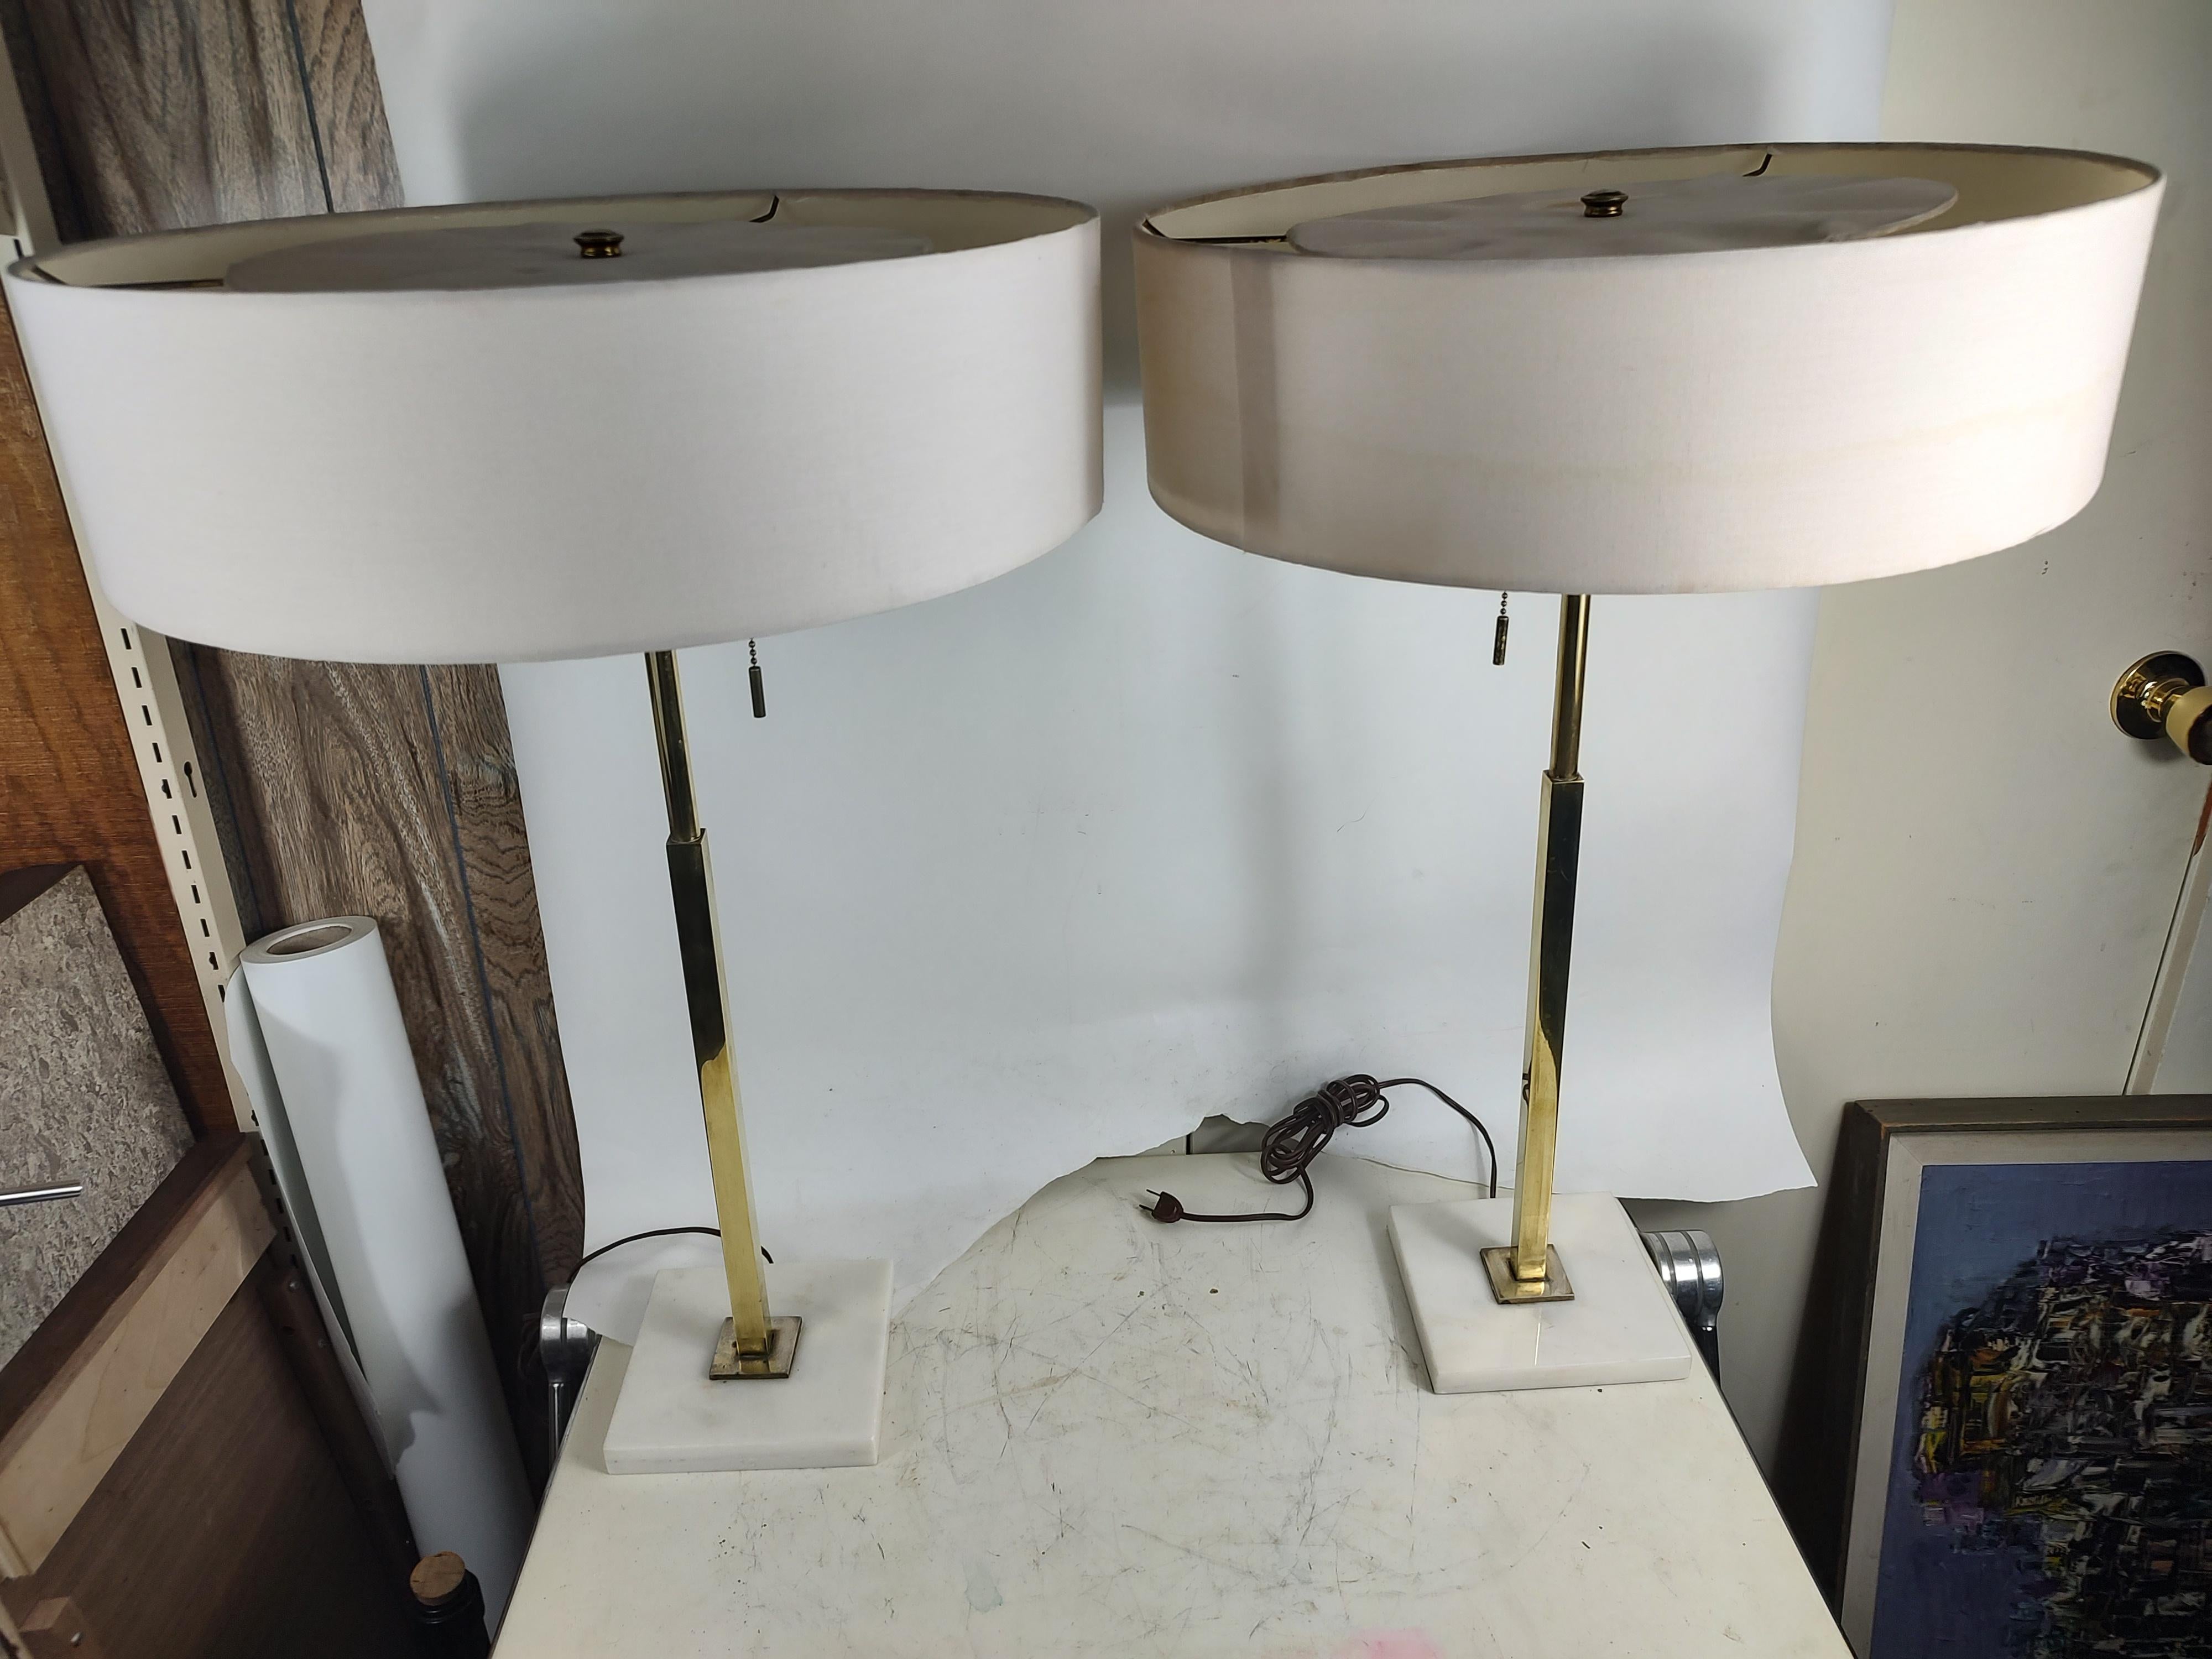 Simple and elegant pair of Mid-Century Modern table lamps with square to round stems on marble plinths. Signed Stiffel on the sockets. Shades to be recovered. In excellent vintage condition with minimal wear. Sold and priced as a pair.